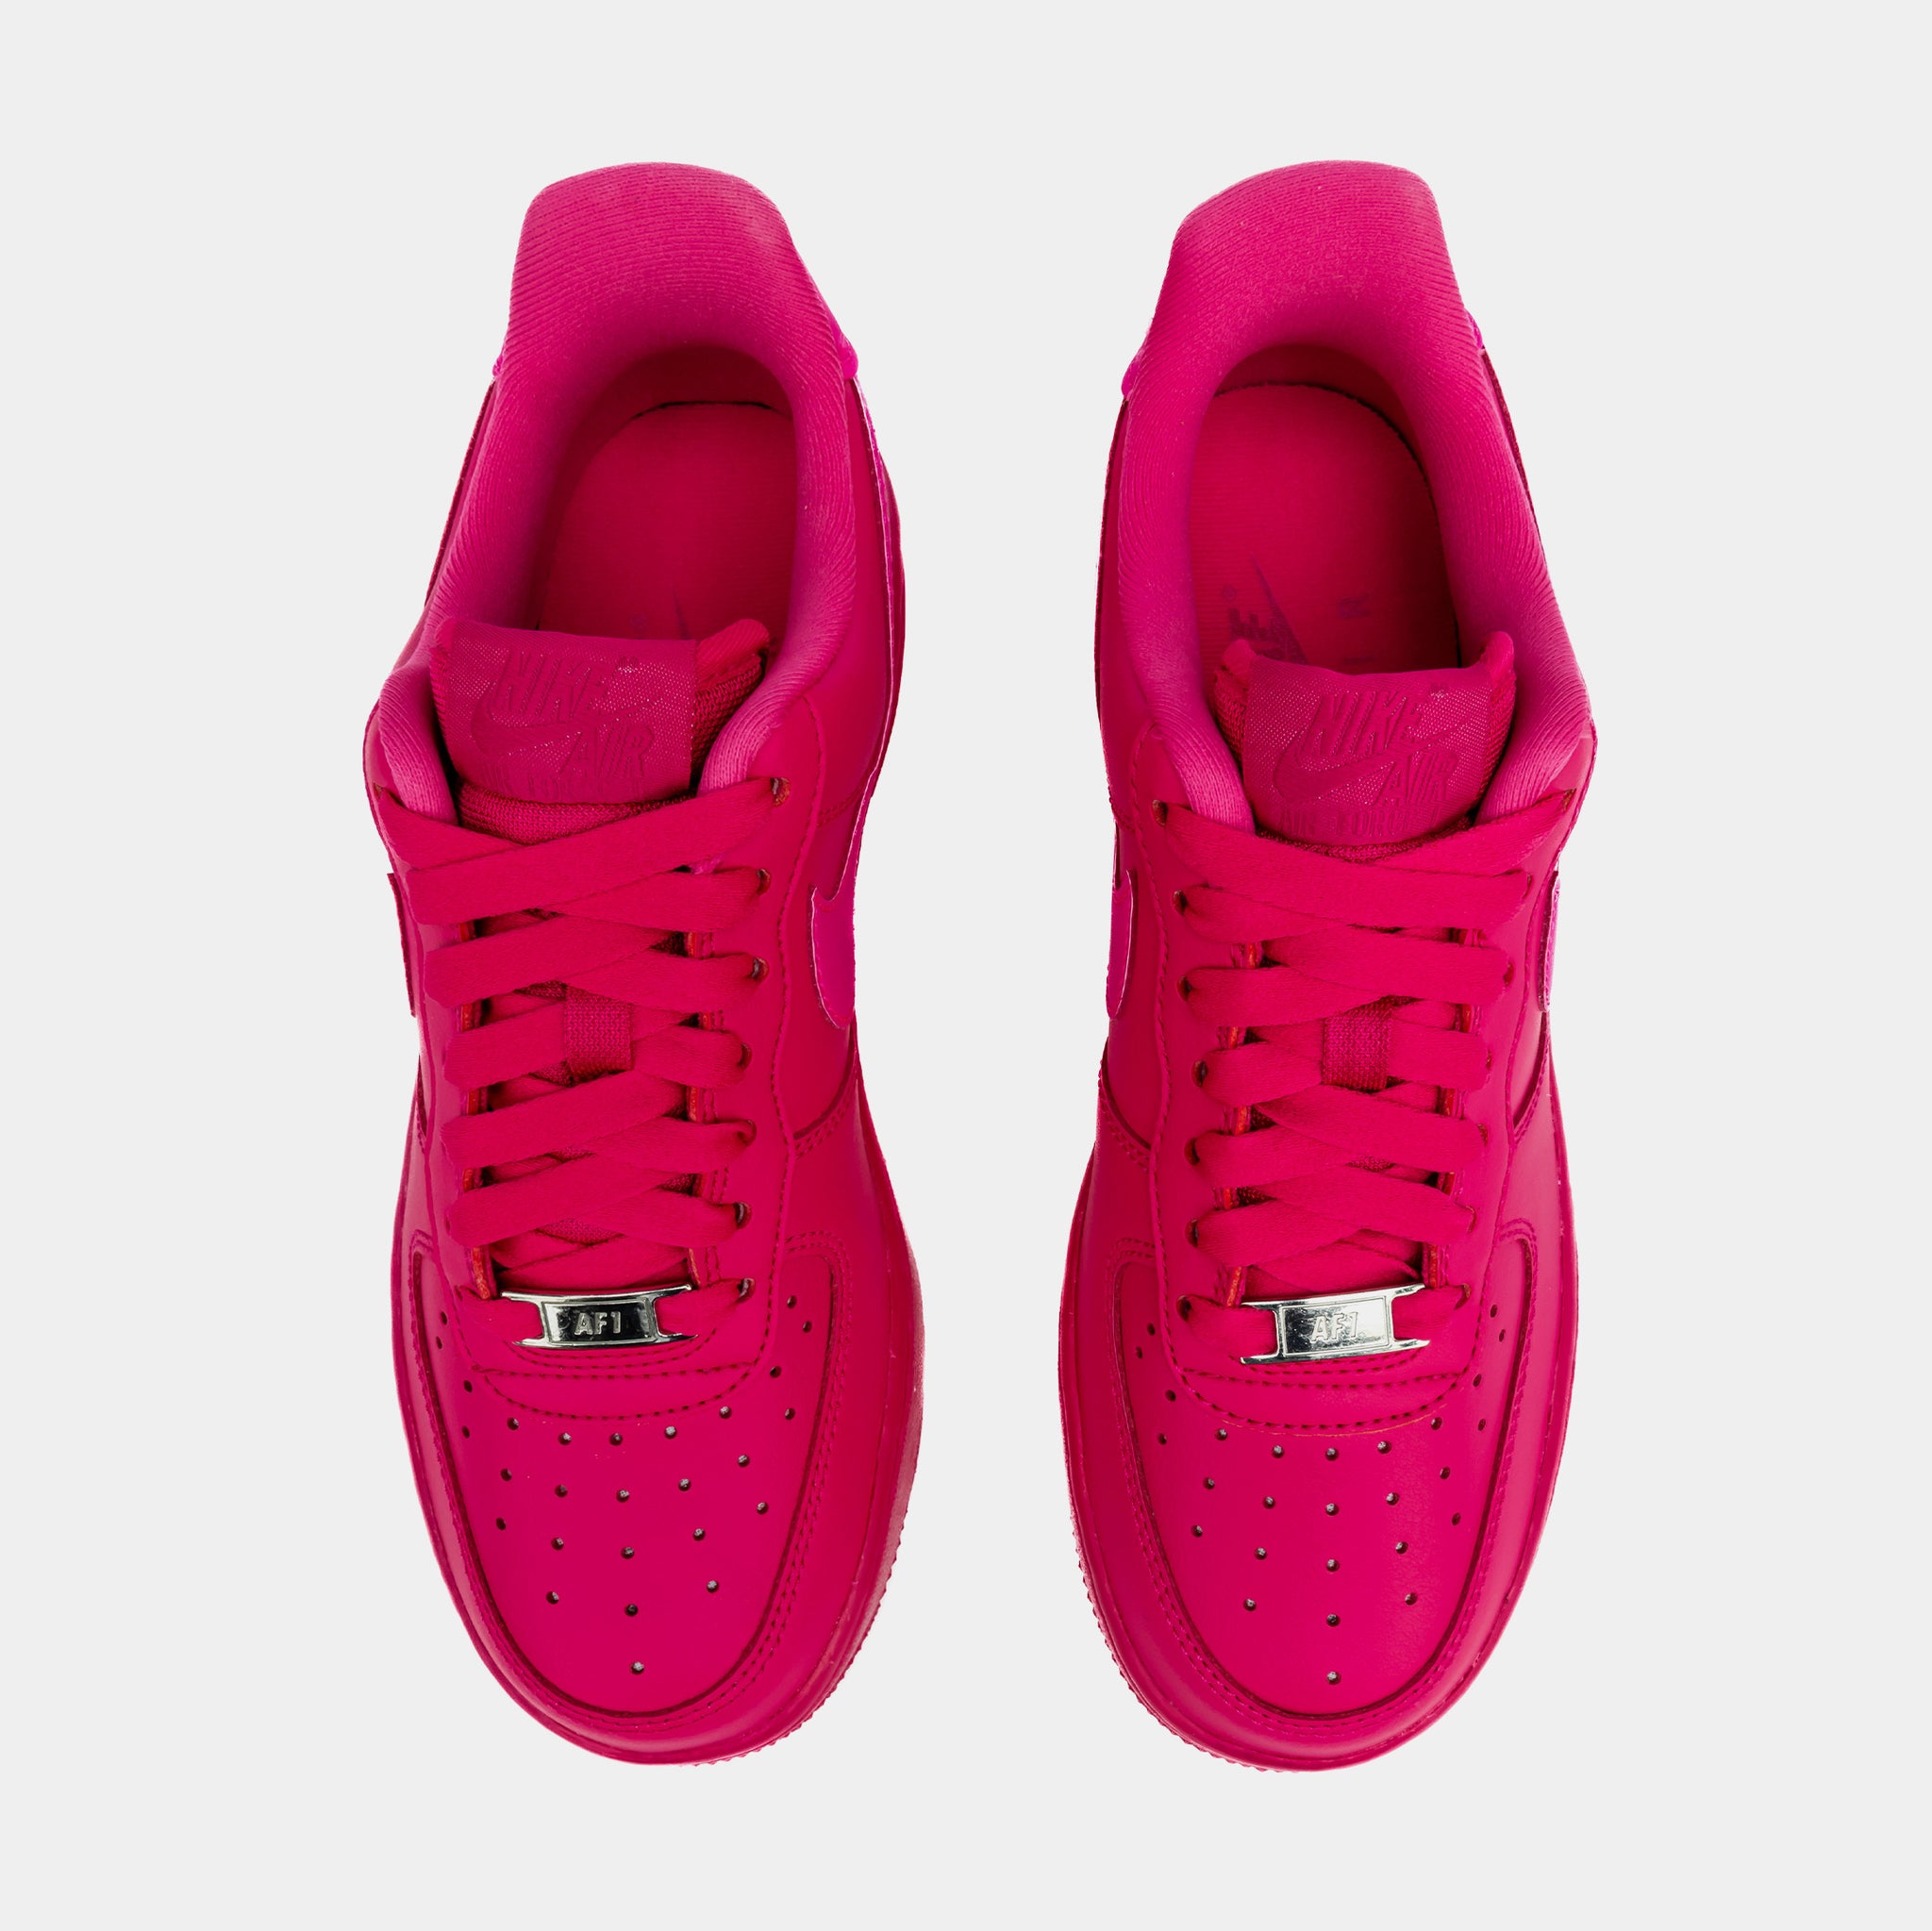 Nike Air Force 1 '07 Fierce Pink Womens Lifestyle Shoes Fireberry